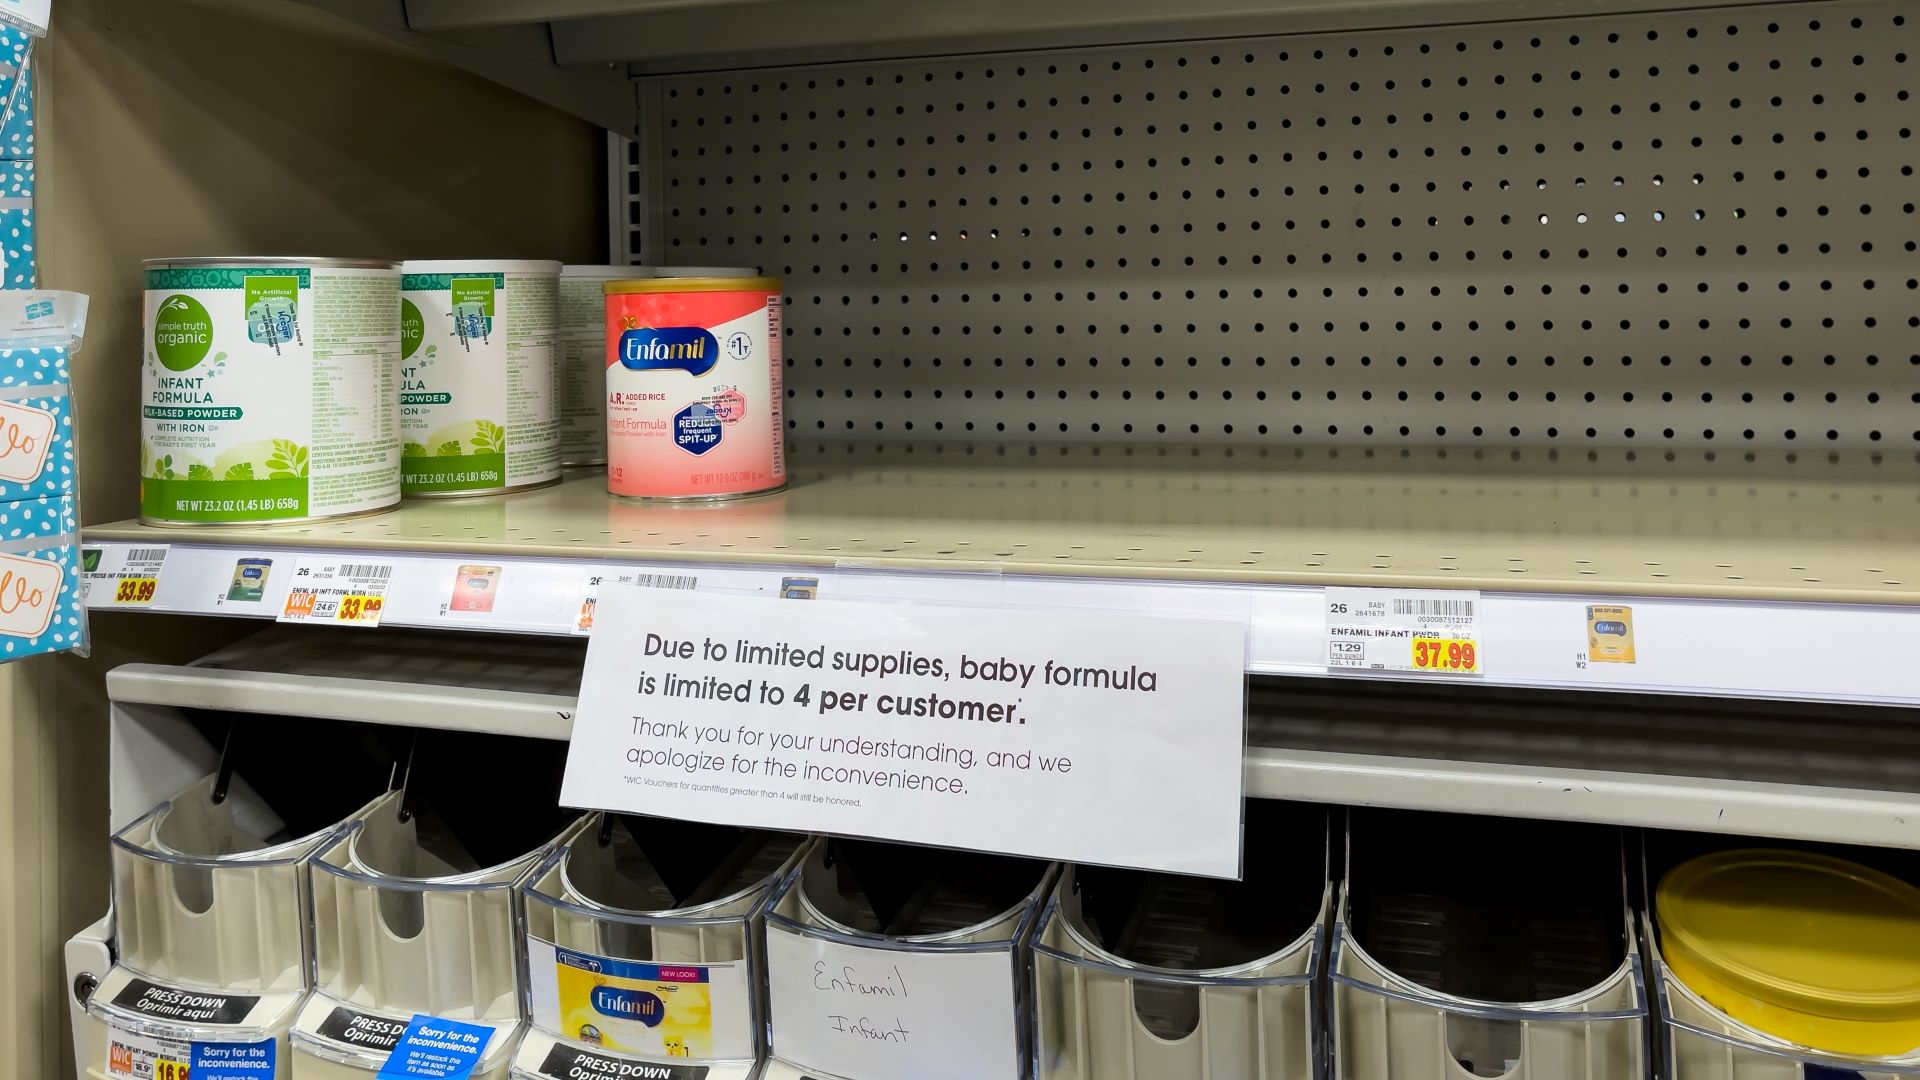 Partially empty shelves of infant formula with a sign alerting consumers.